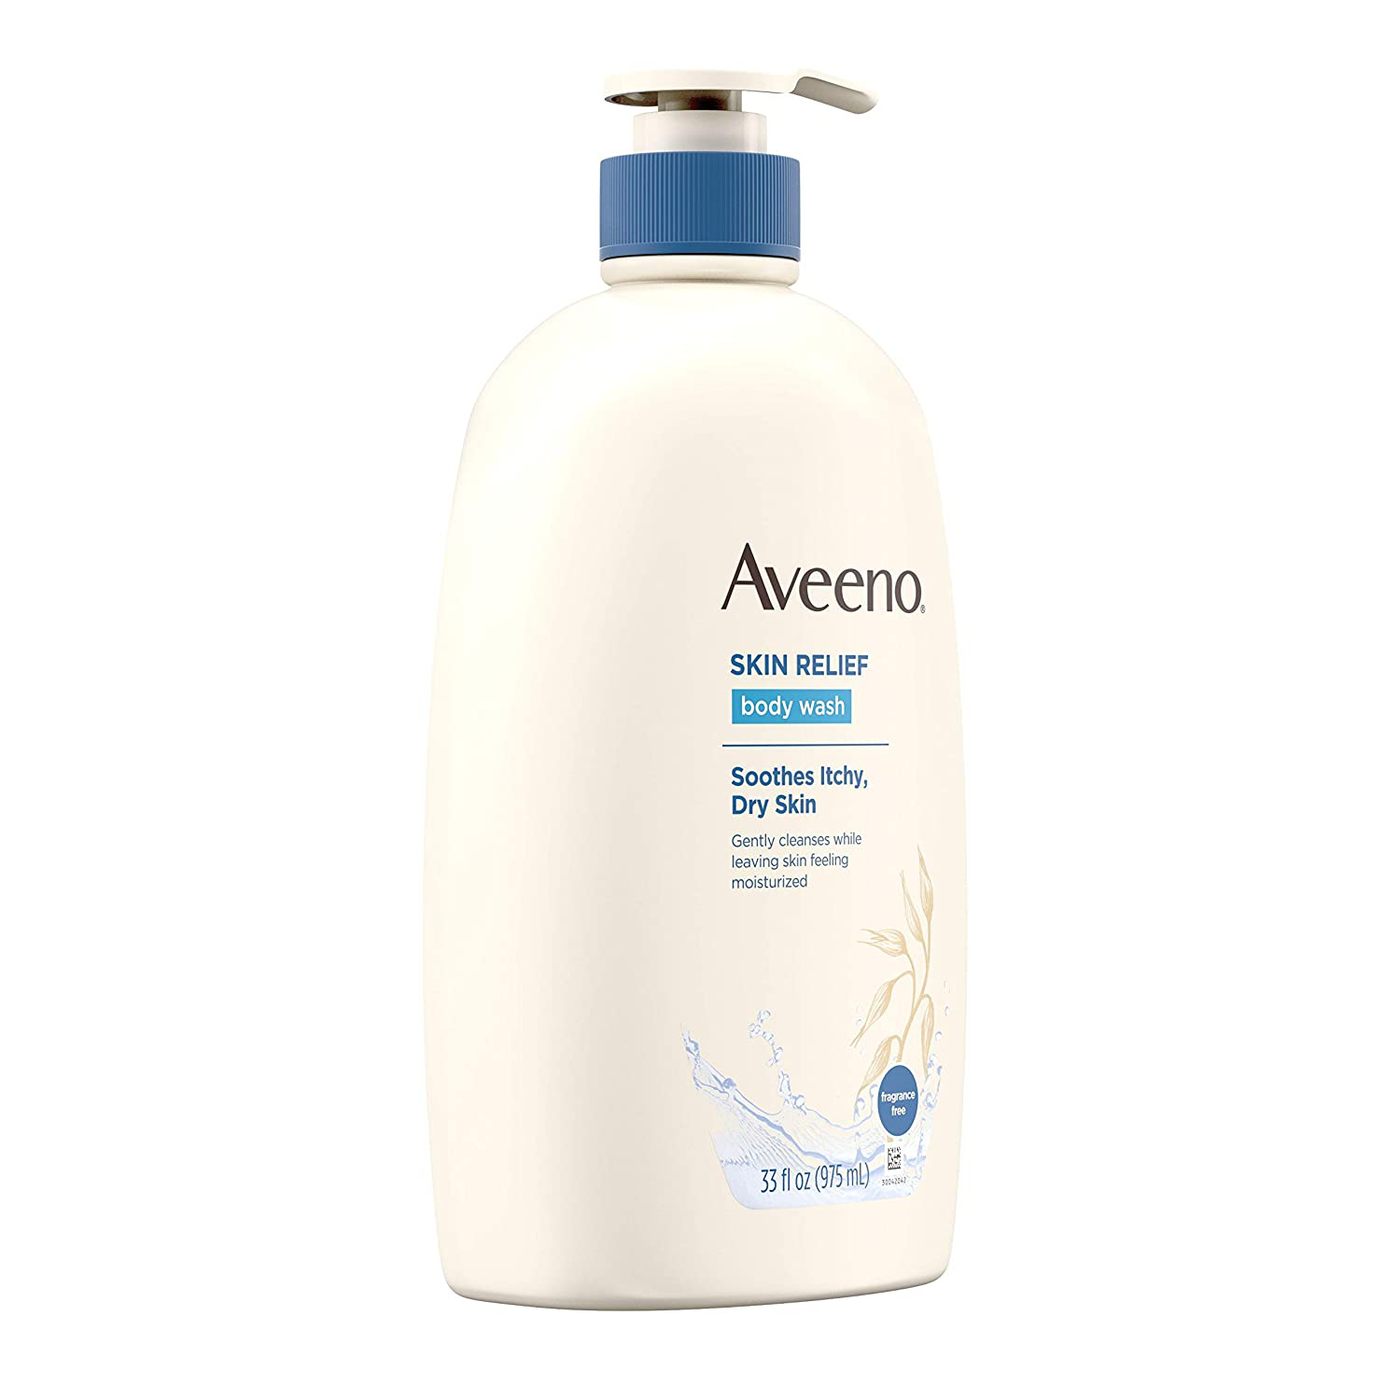 Aveeno Skin Relief Fragrance-Free Body Wash with Oat to Soothe Dry Itchy Skin, Gentle, Soap-Free & Dye-Free for Sensitive Skin, 33 fl. Oz